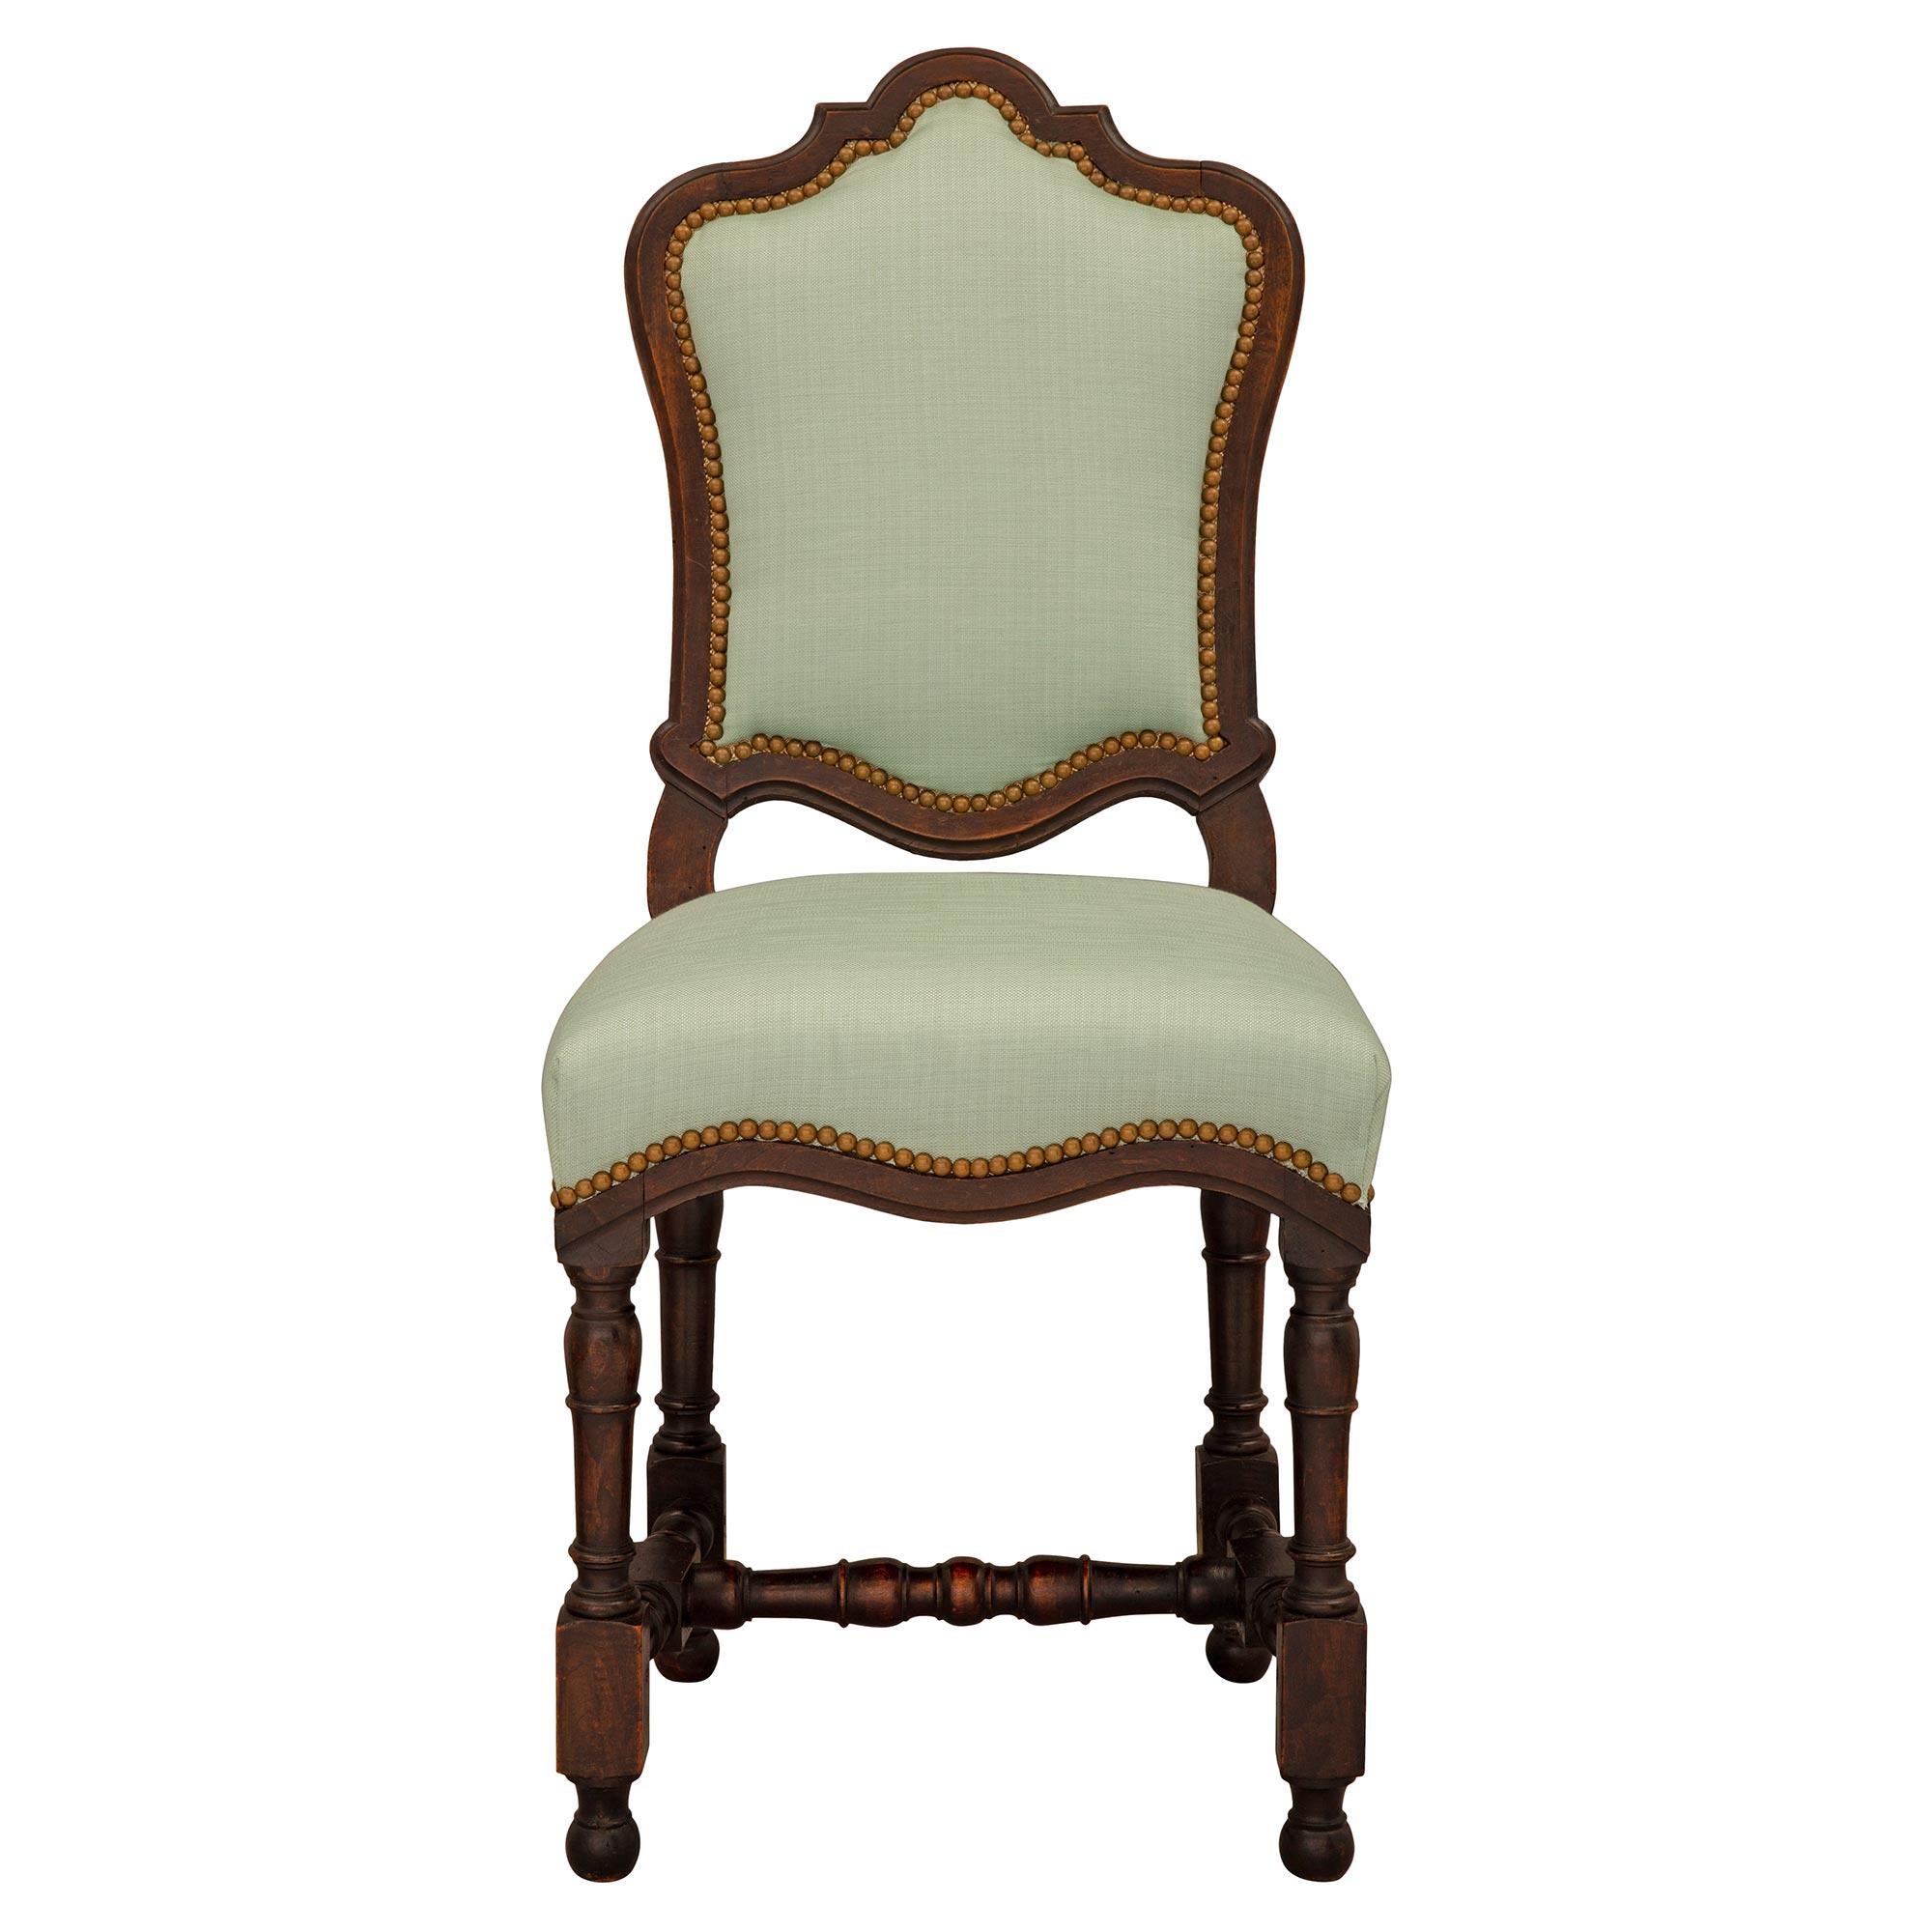 A handsome and complete set of six Italian 18th century Louis XIV period walnut dining chairs. Each chair is raised by elegant ball feet below block reserves and lovely turned legs each connected by a finely mottled stretcher. The seat displays a